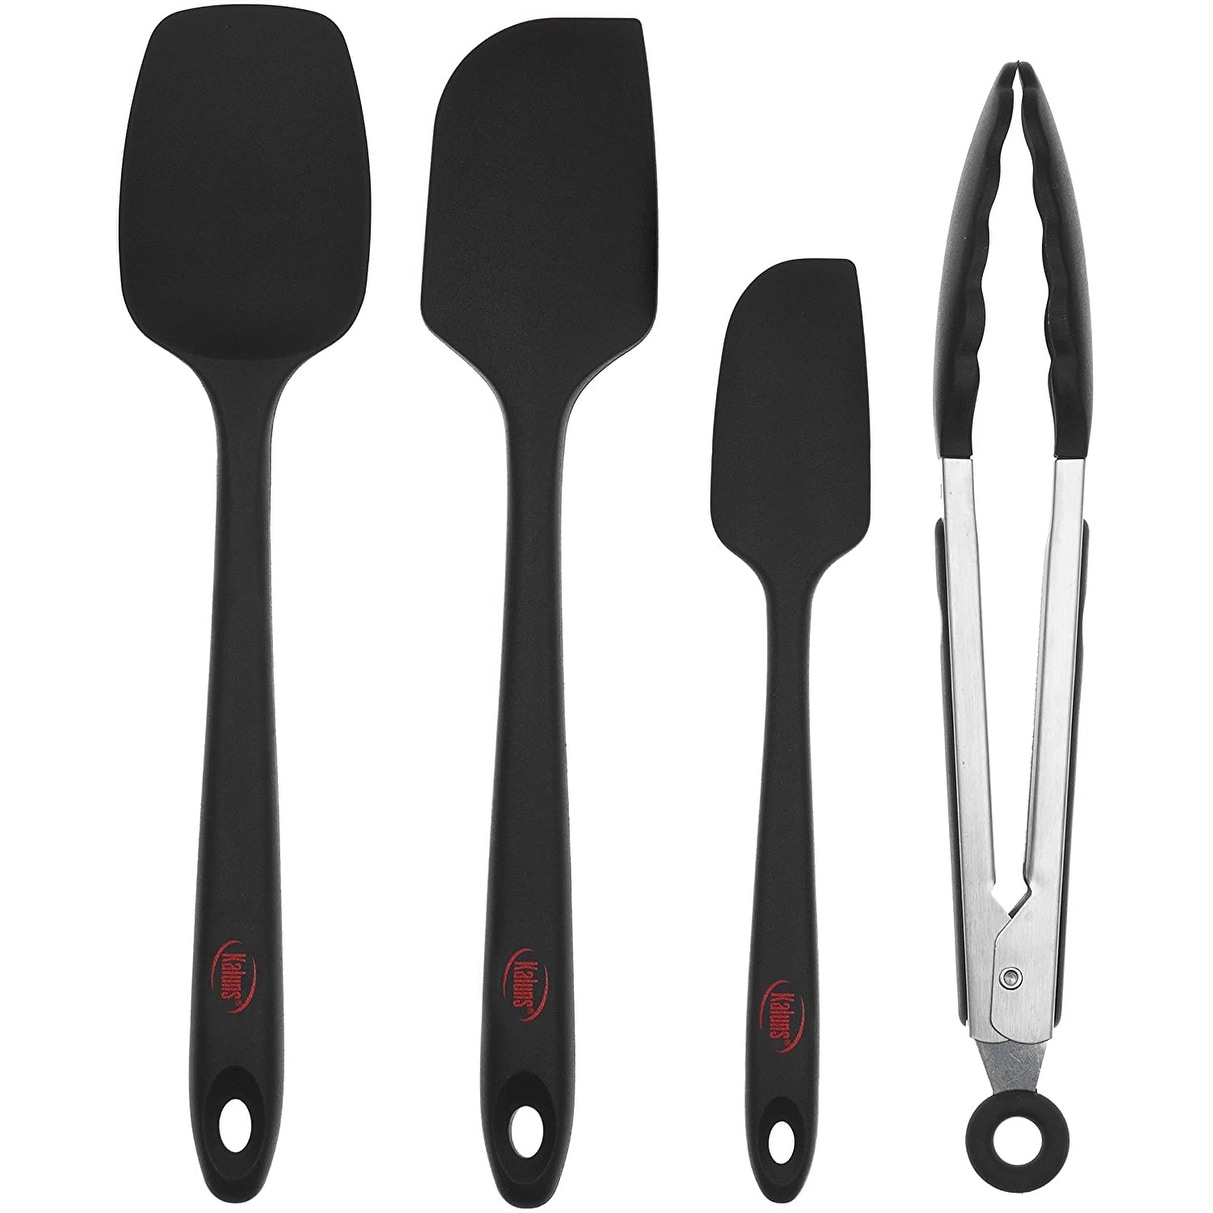  Spatulas Set of 6, Food Grade Silicone Spatulas, Rubber  Spatulas Heat Resistant, Seamless One Piece Design, Stainless Steel Core, Kitchen  Utensils Nonstick for for Cooking, Baking and Mixing (Black): Home 